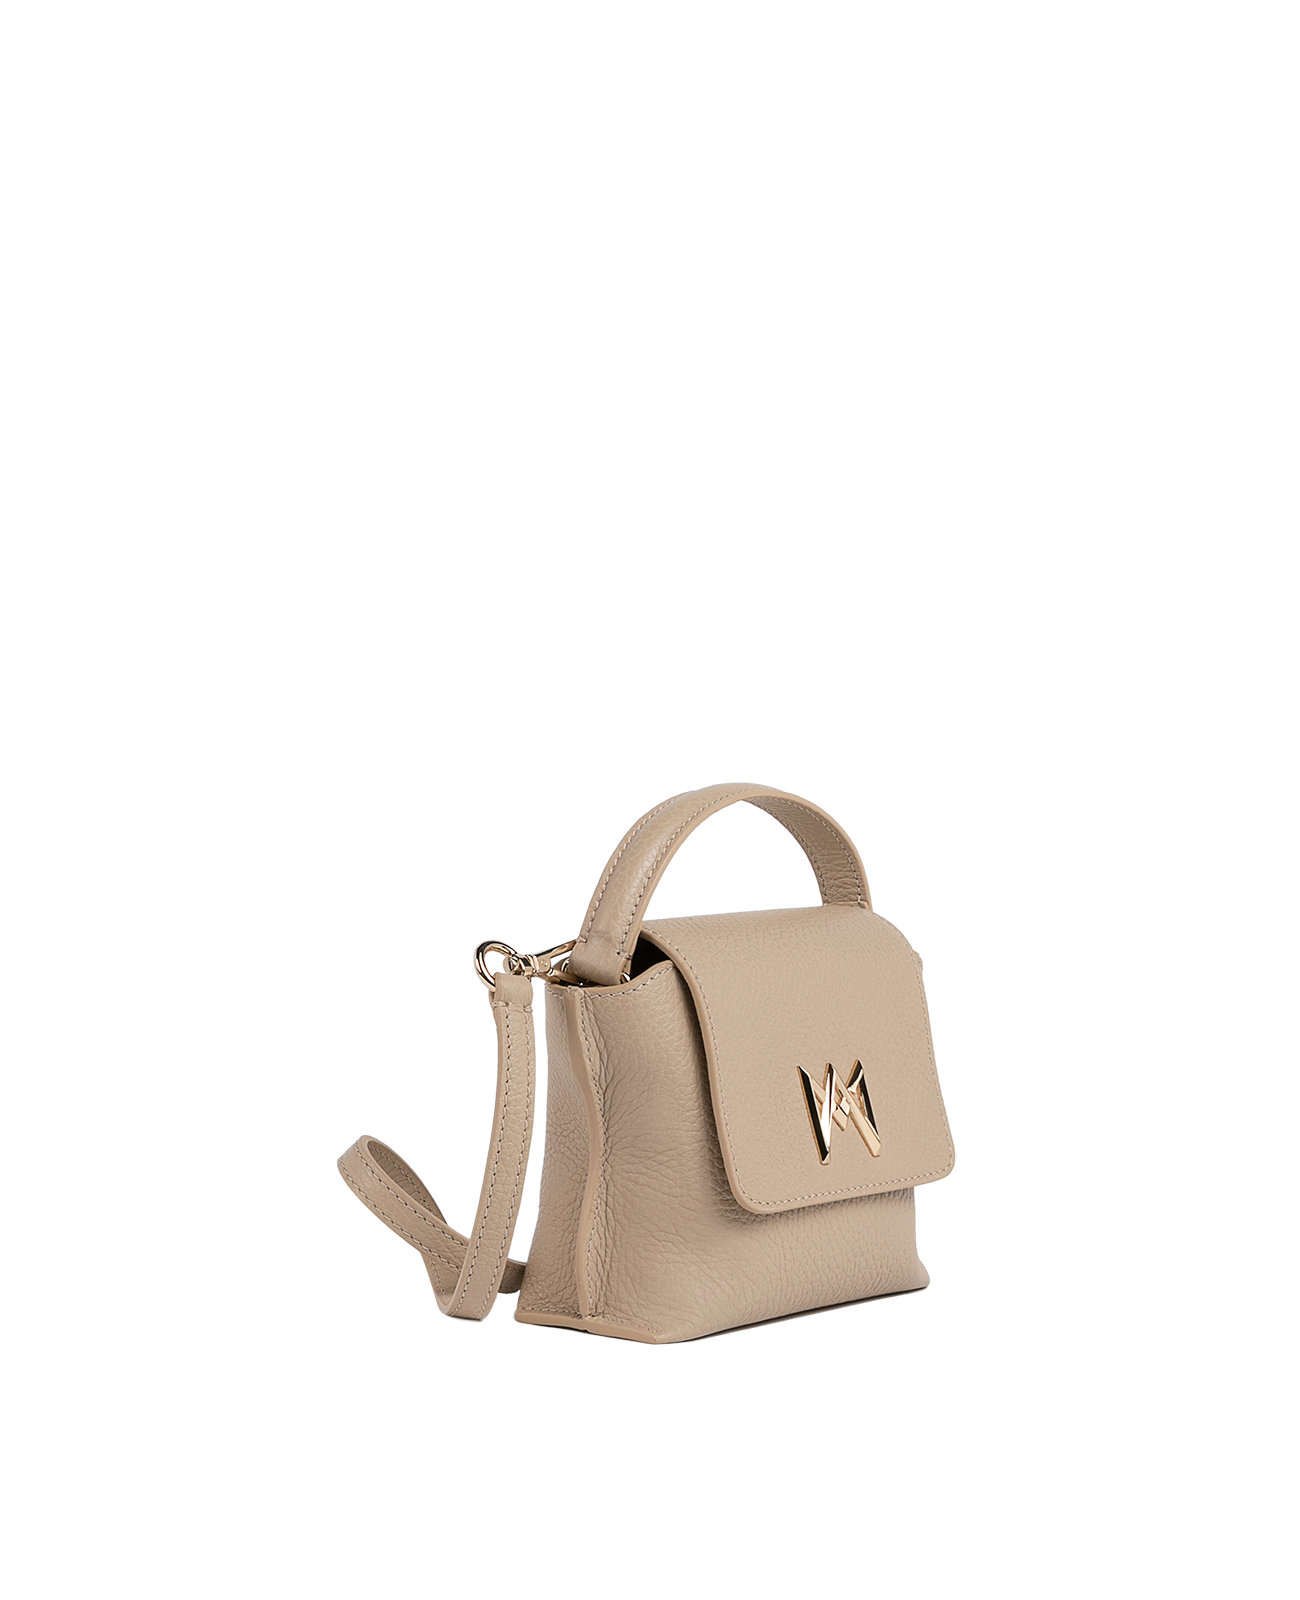 Cross-body bag in Italian full-grain leather, semi-aniline calf Italian leather with detachable shoulder strap.Three compartments, zip pocket in the back compartment. Magnetic flap closure with logo. Color: Nude. Size:Mini